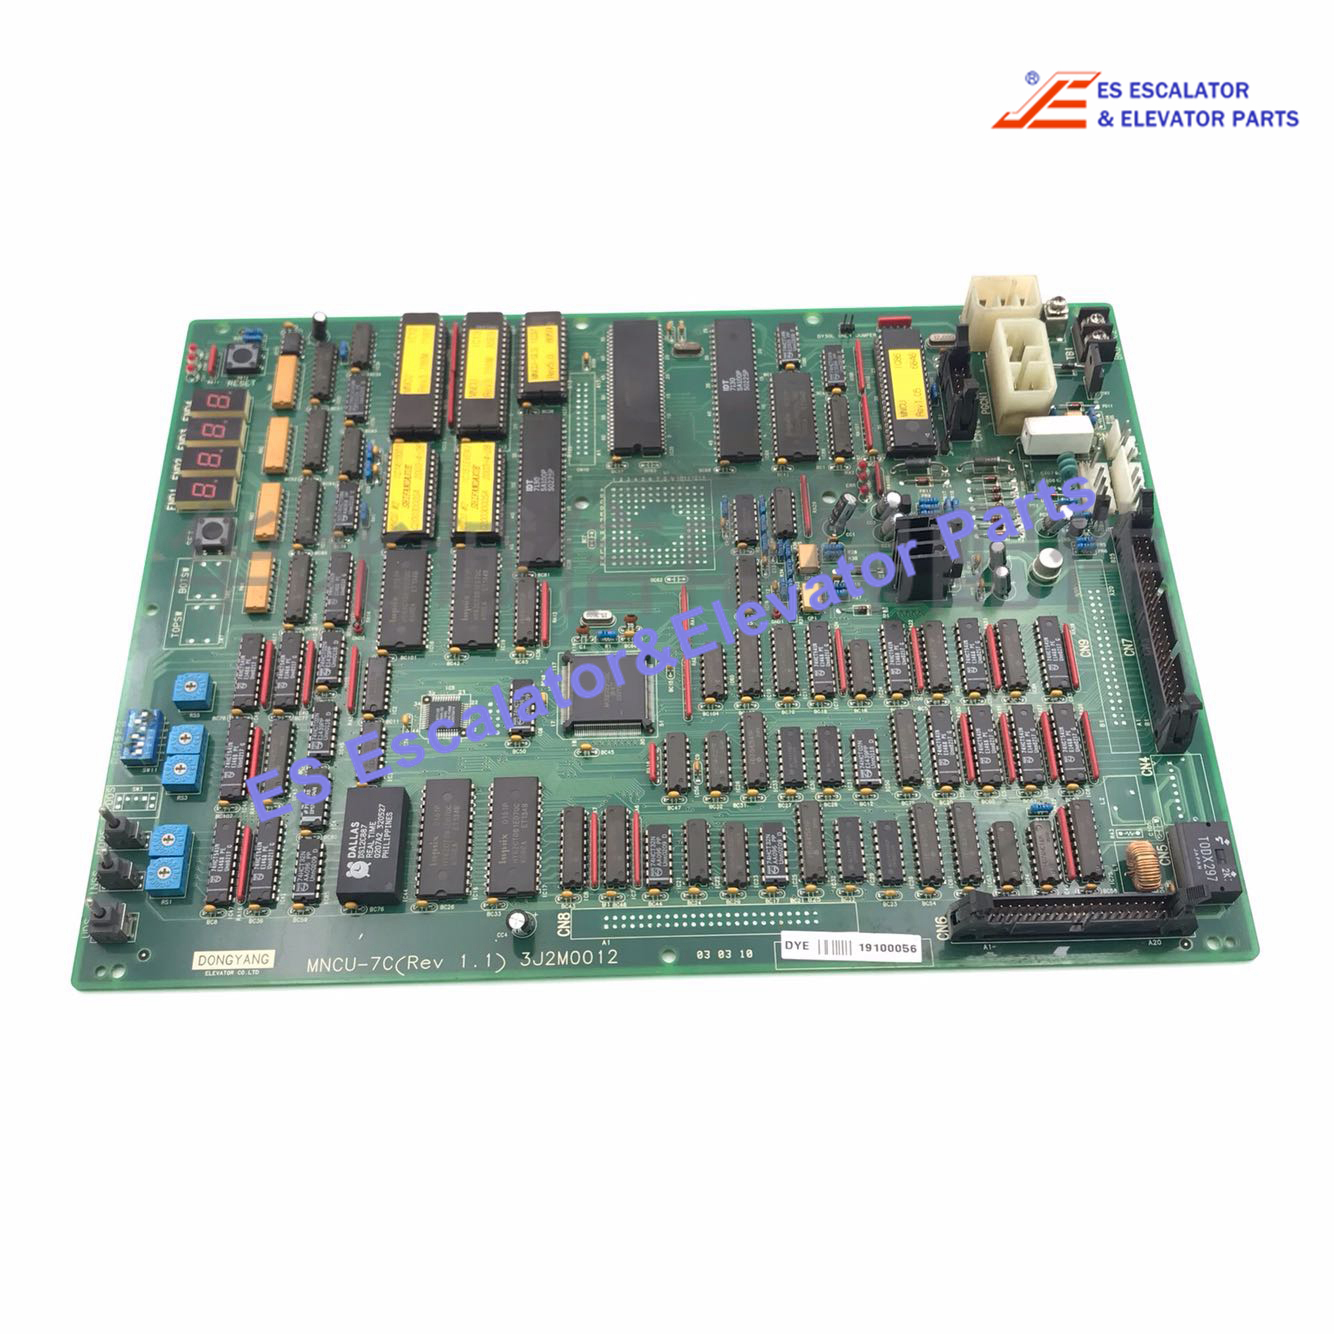 MNCU-8C REV2.0 Elevator Circuit Board Use For Thyssenkrupp